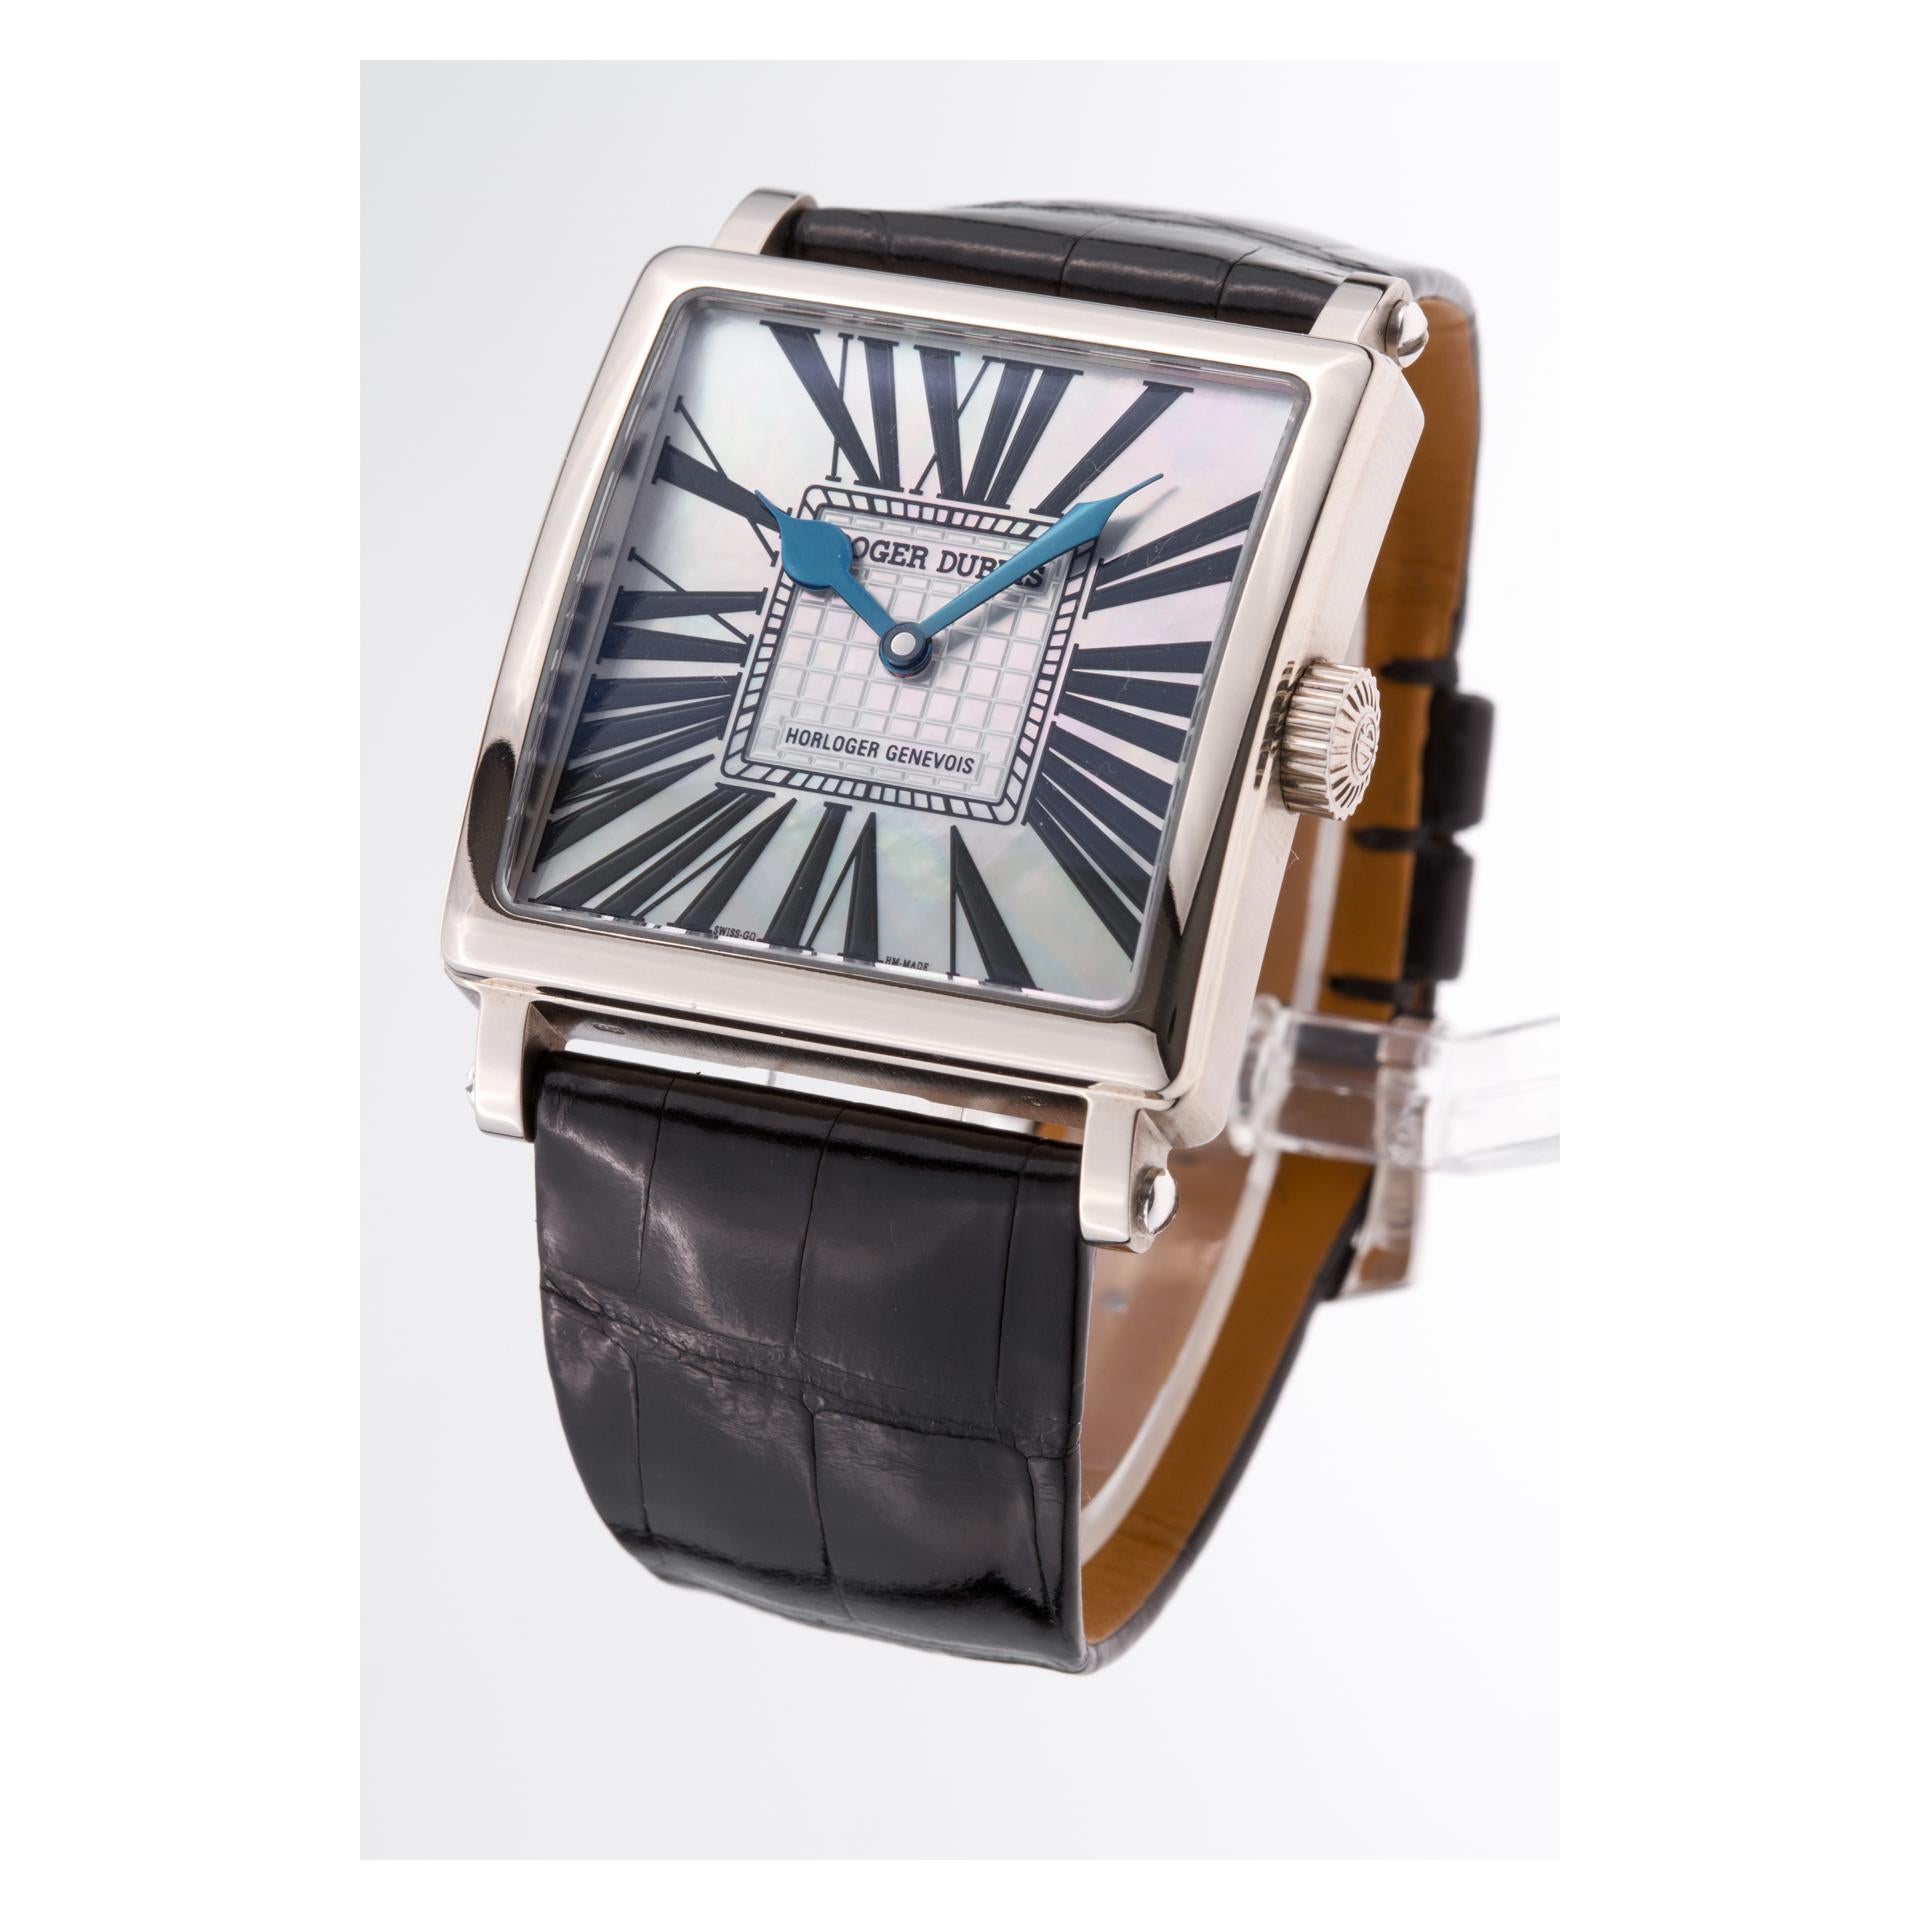 Roger Dubuis Golden Square in 18k white gold with mother of pearl dial on an original Roger Dubuis black alligator strap with original 18k white gold tang buckle. 37mm case size. Auto. With box and papers. Ref DBGS0322. Circa 2000s. Fine Pre-owned